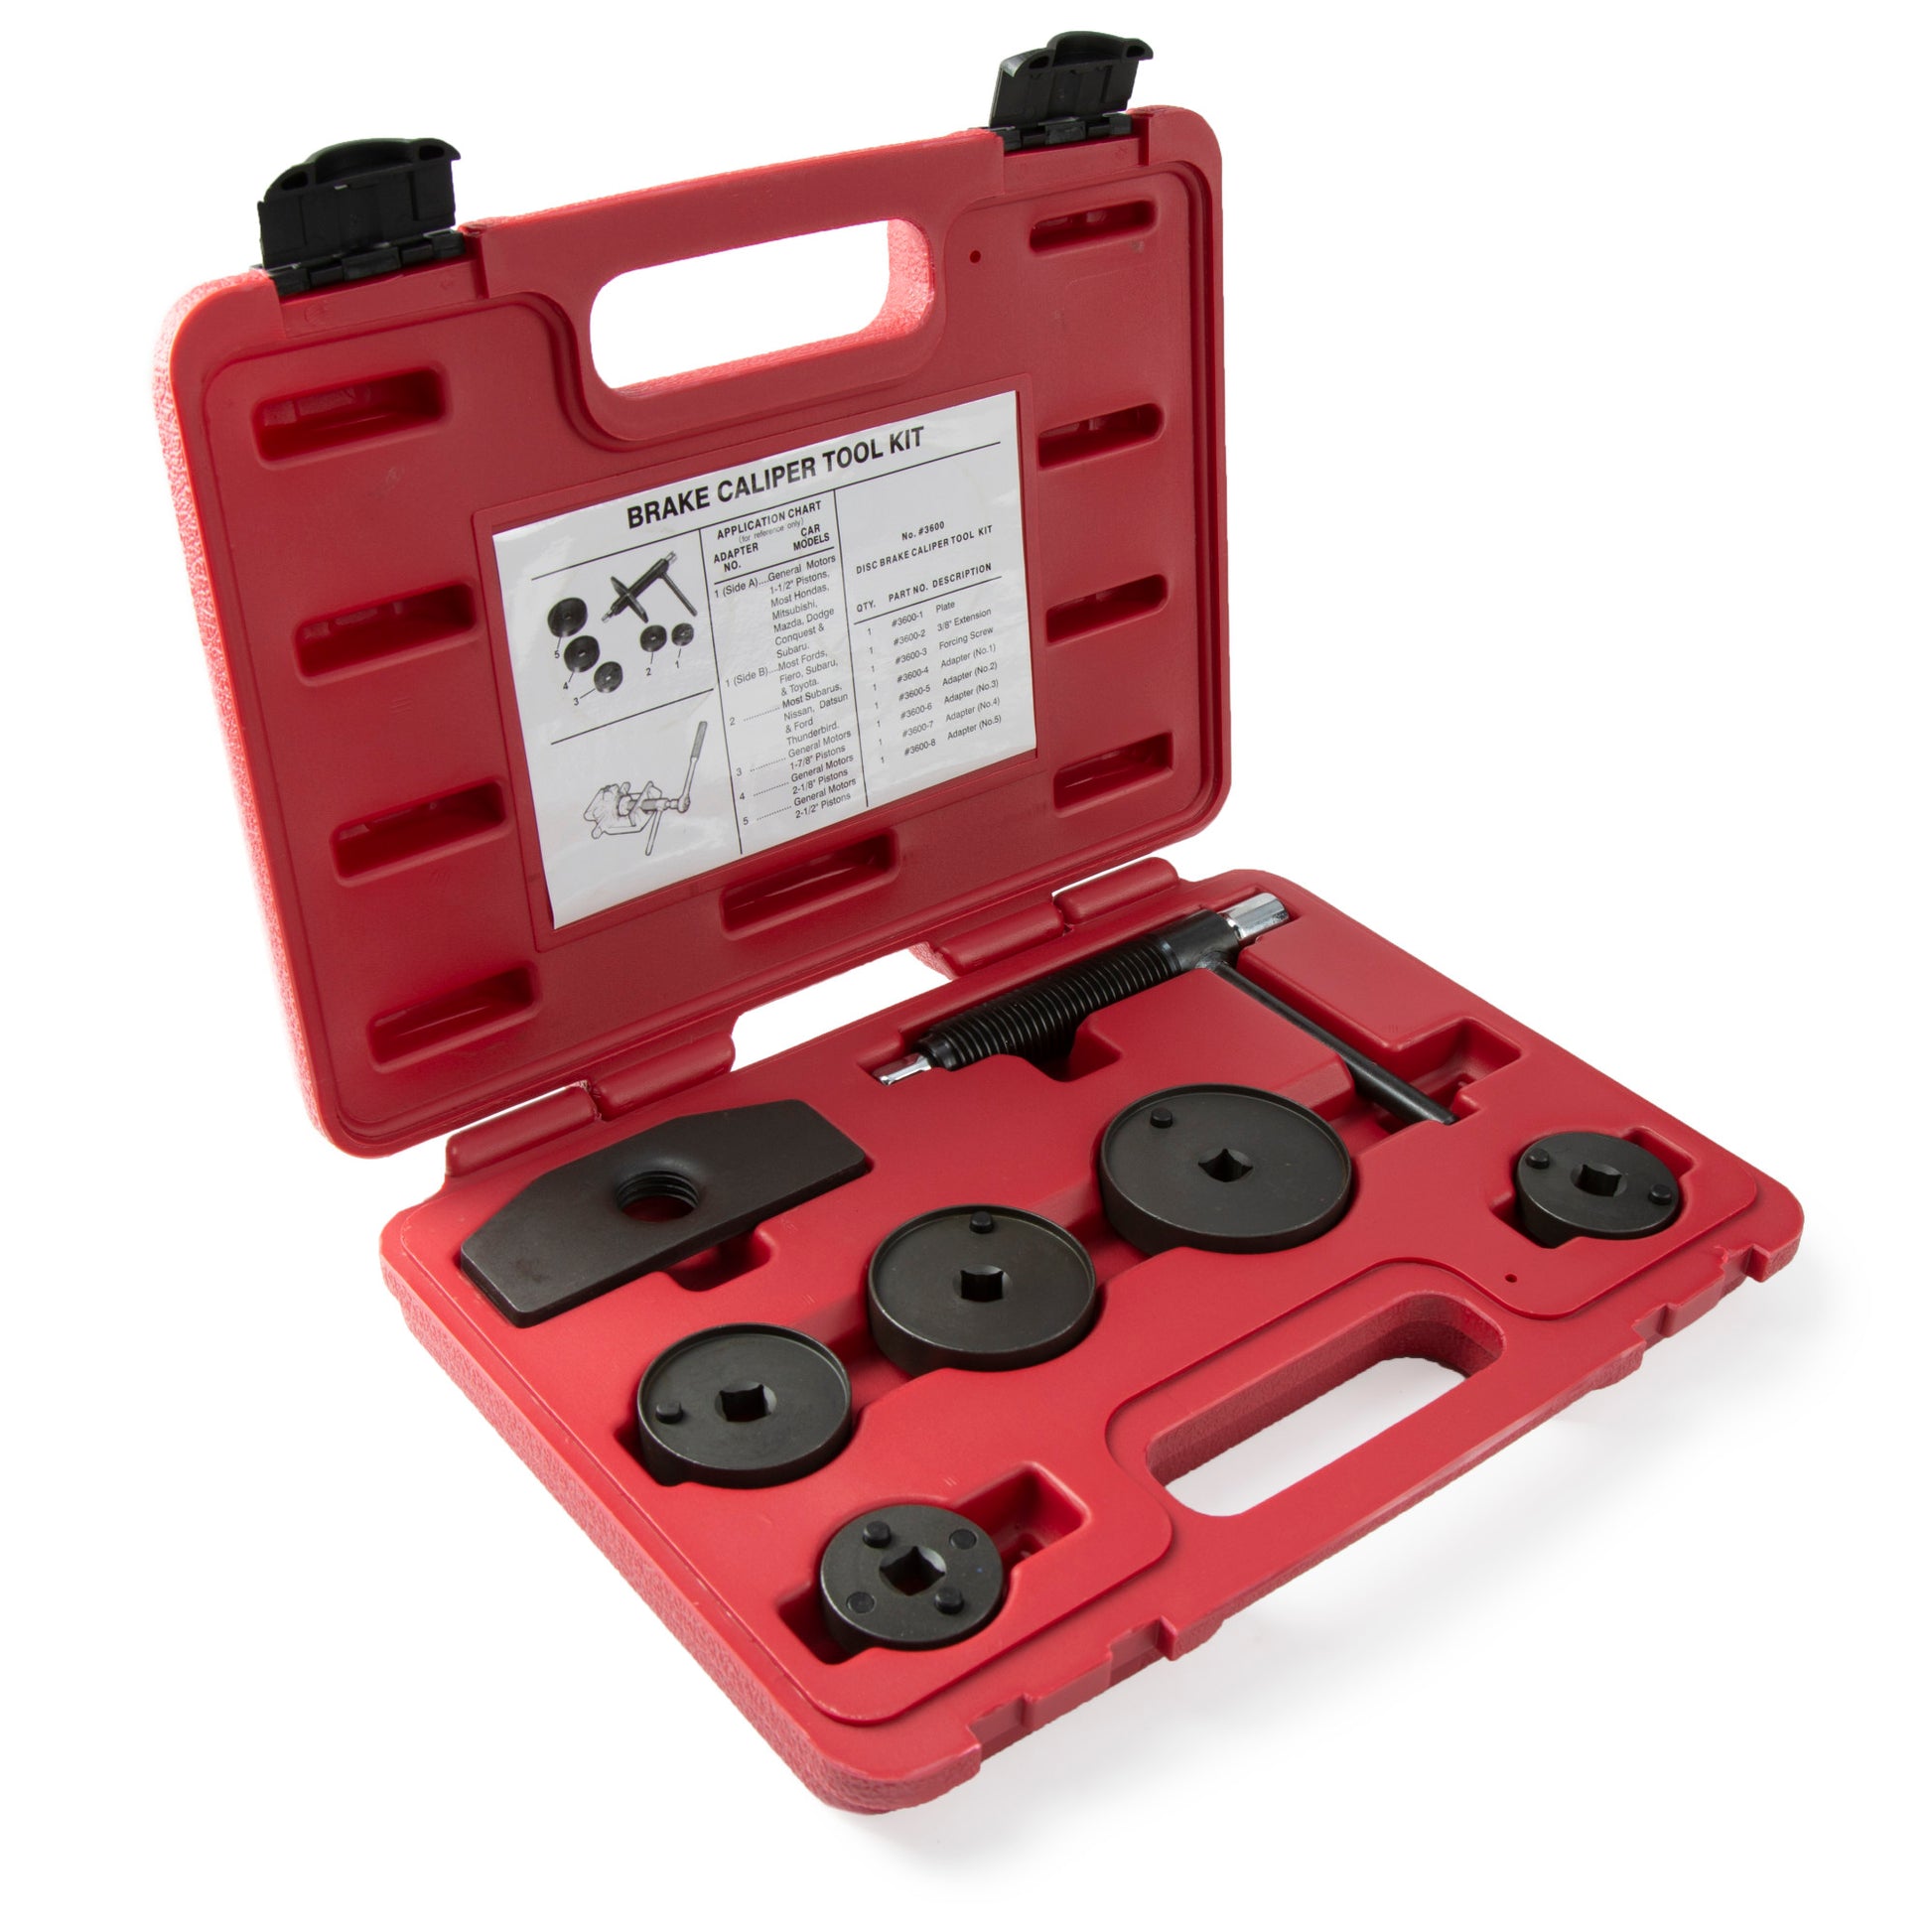 MOSTPLUS Universal Disc Brake Caliper Wind Back Tool and Piston Compression  Sets-26 Pieces (Red)